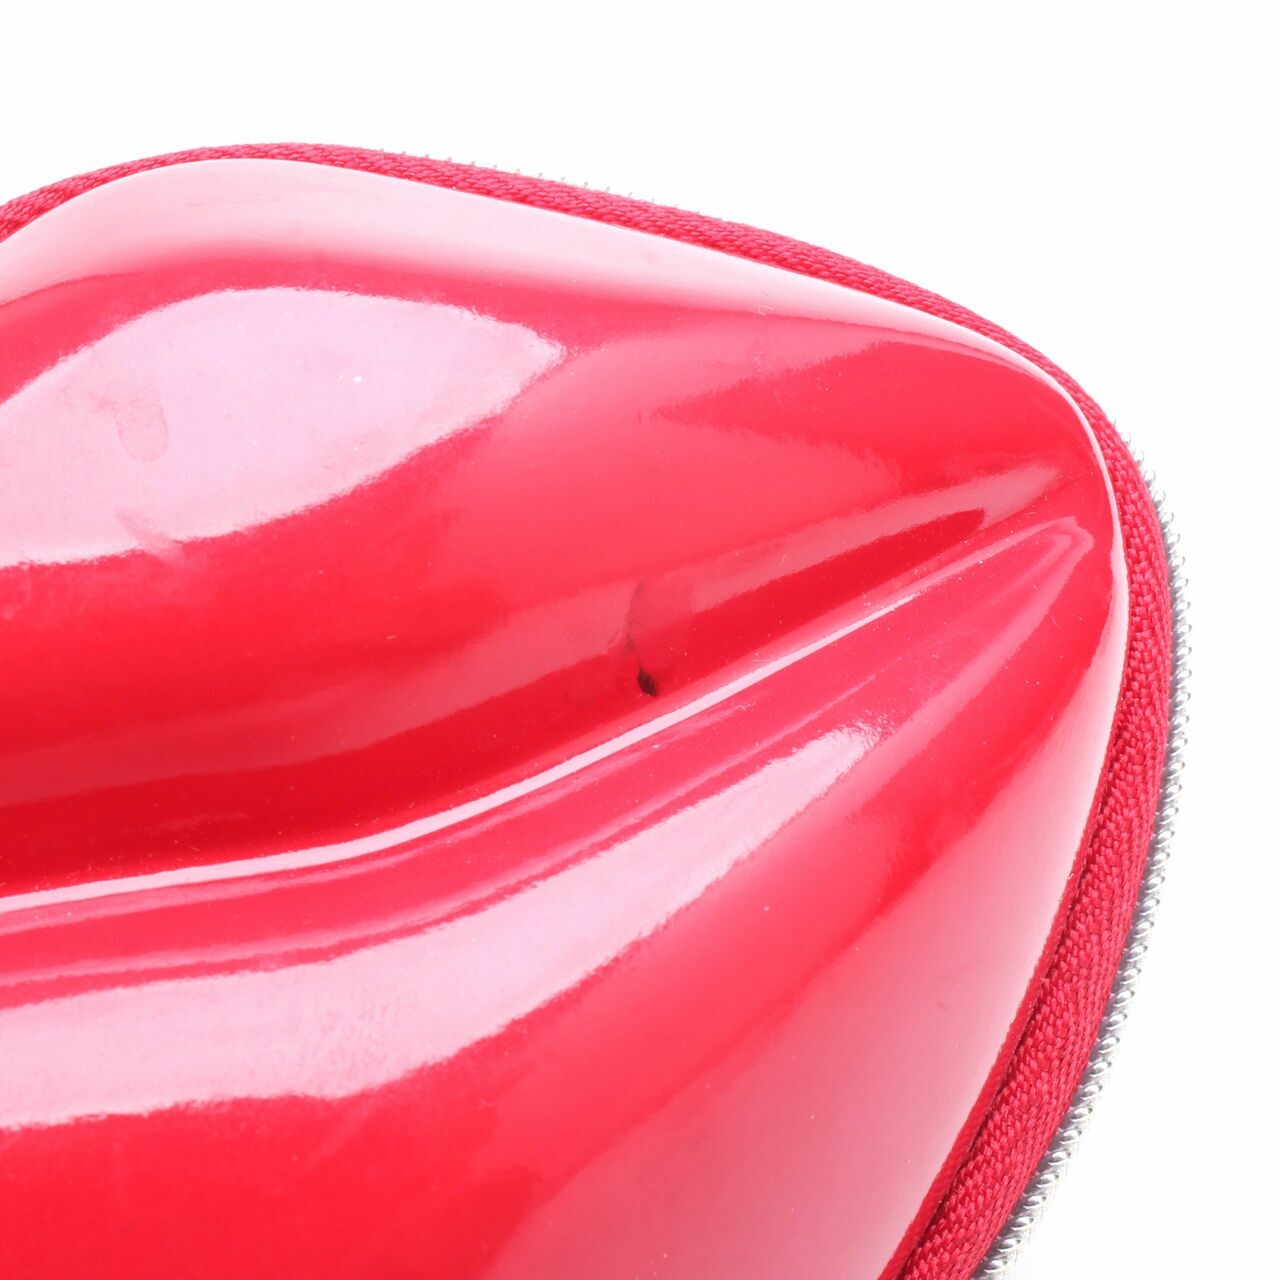 The Body Shop Red Pouch